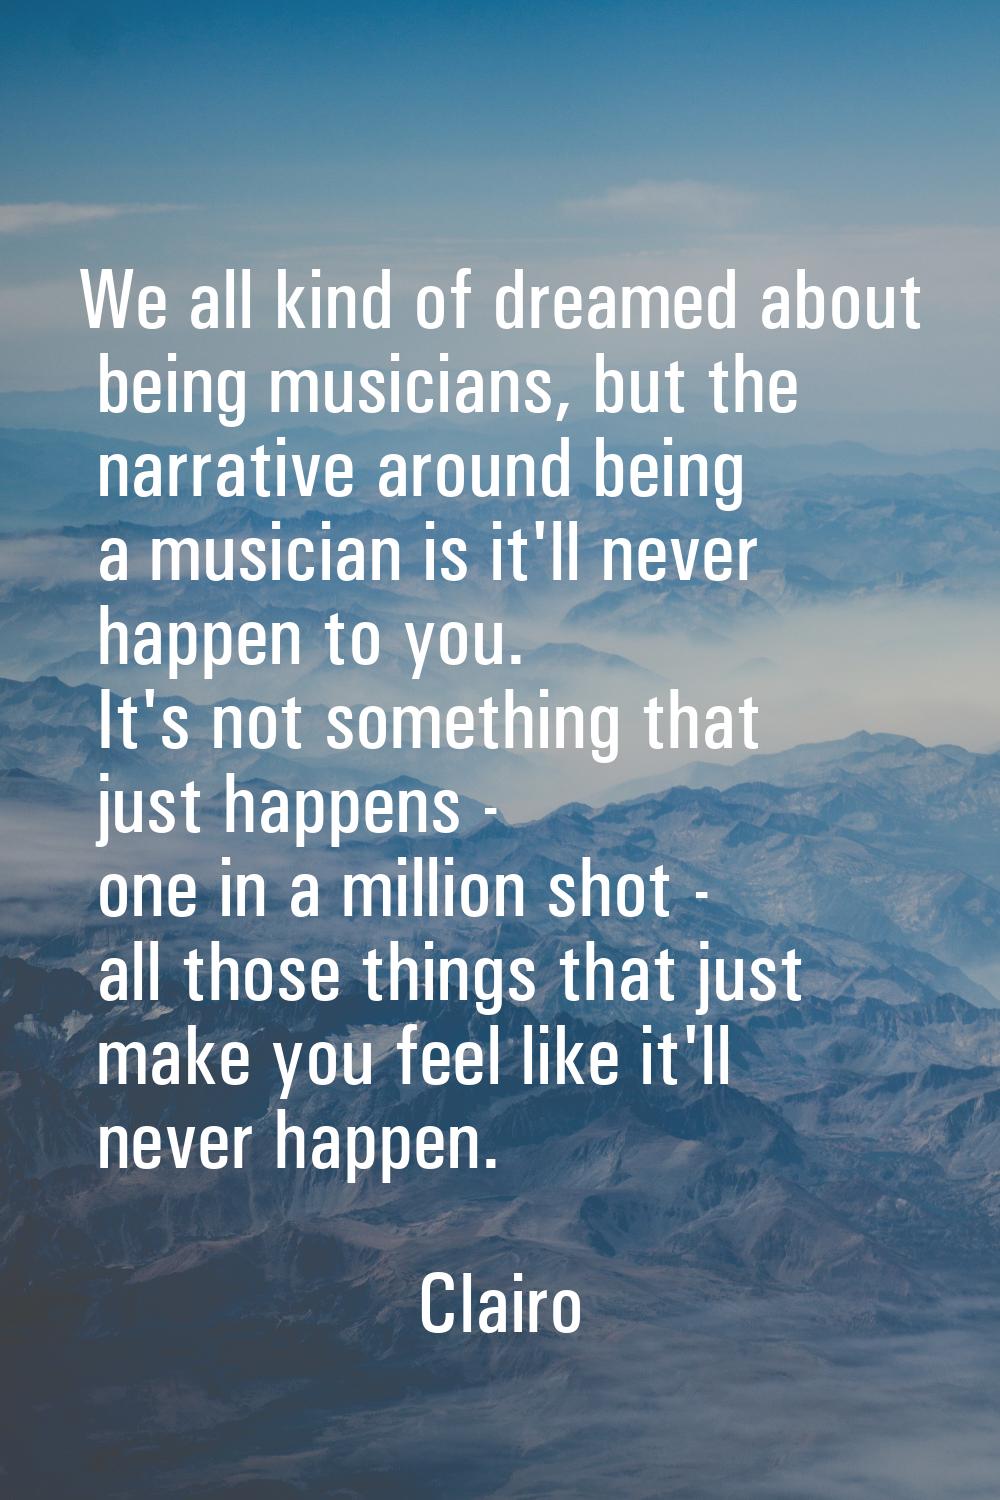 We all kind of dreamed about being musicians, but the narrative around being a musician is it'll ne